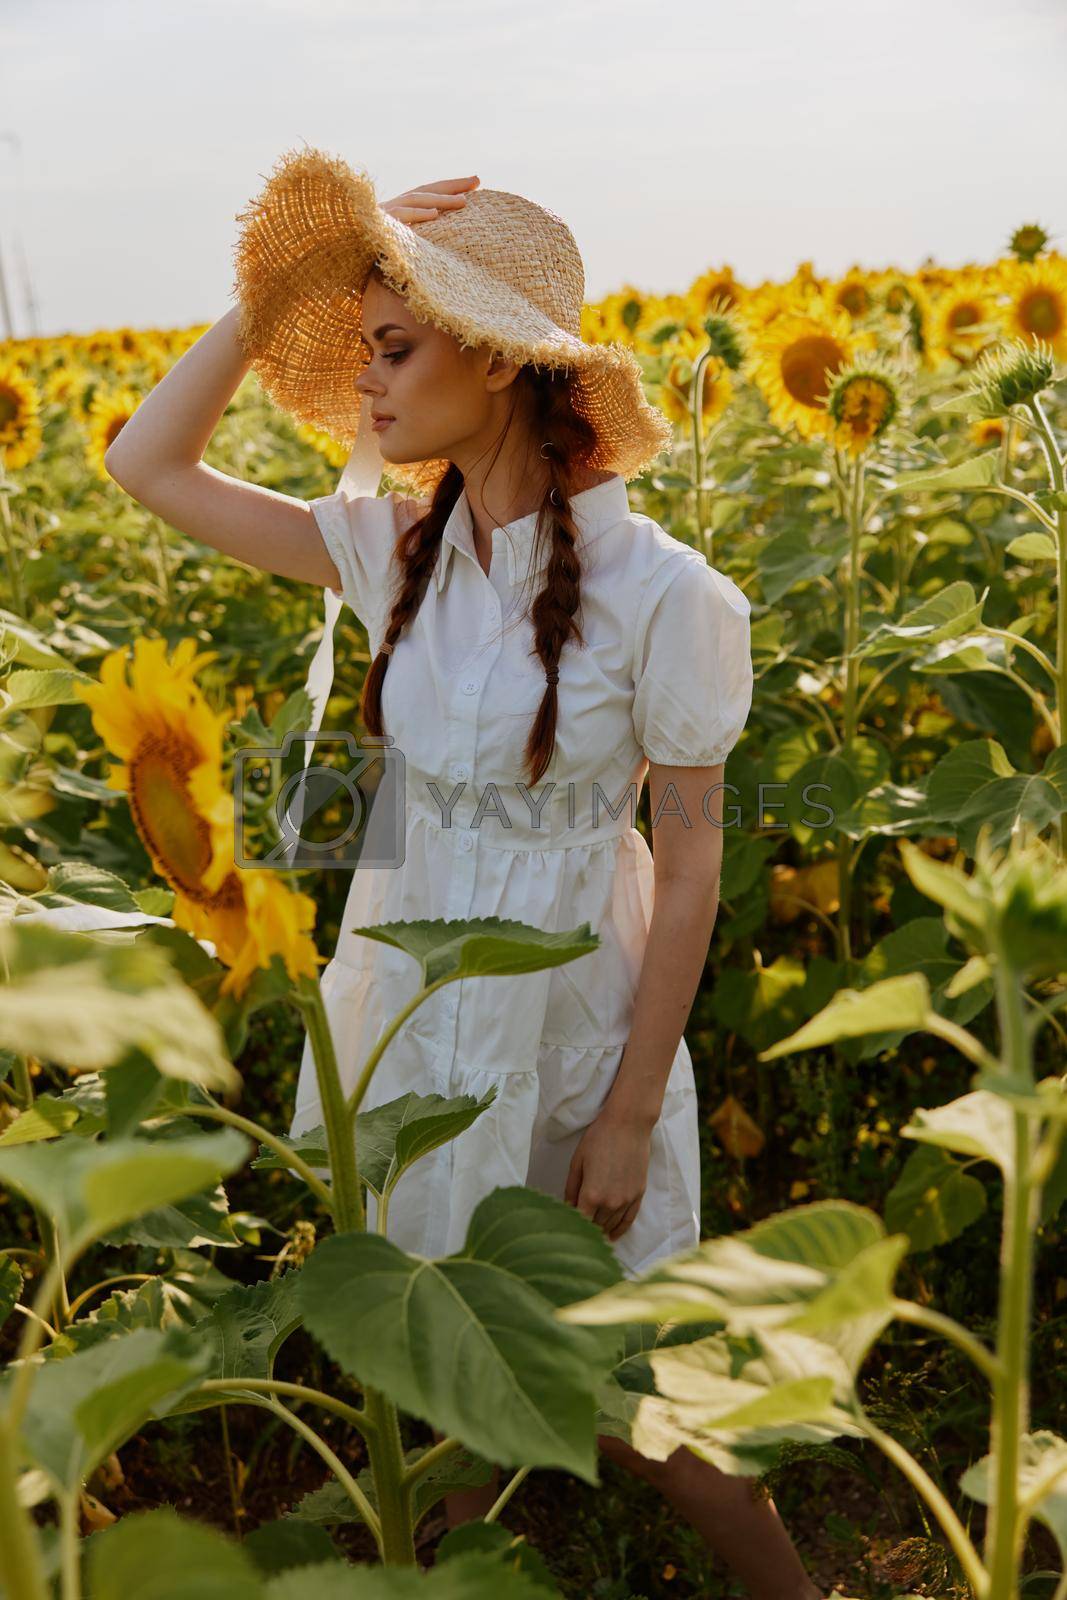 beautiful sweet girl in a field of sunflowers lifestyle countryside. High quality photo